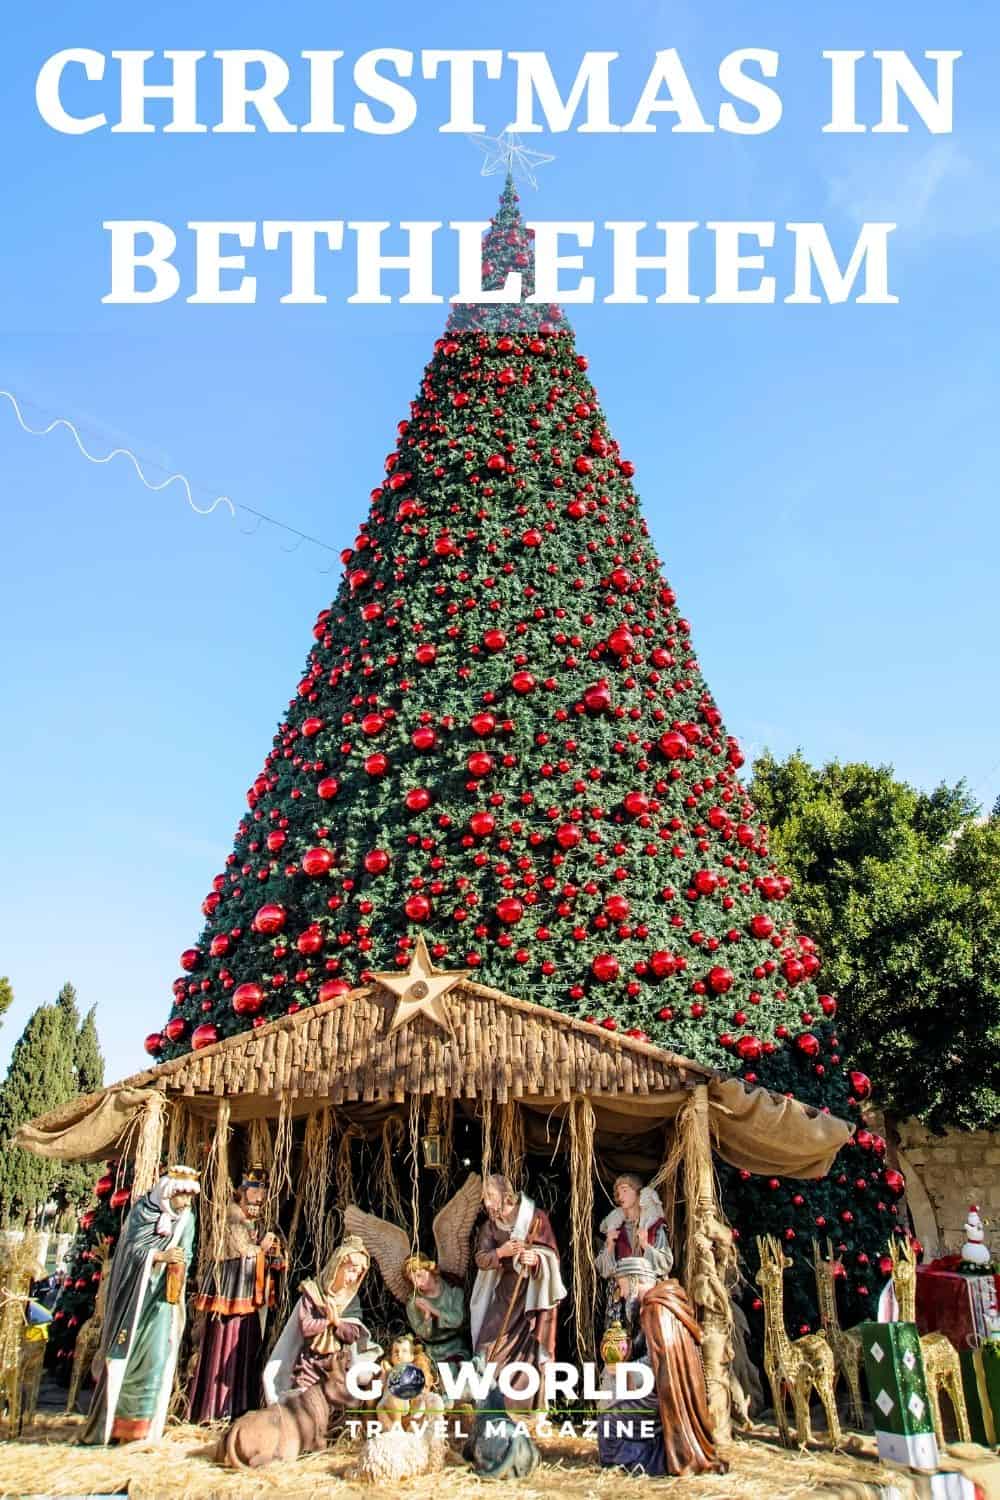 Have you dreamed of spending Christmas in Bethlehem? Read about what to see and do in the city where Christ and therefore, Christmas was born. #Bethlehem #christmasinbethlehem